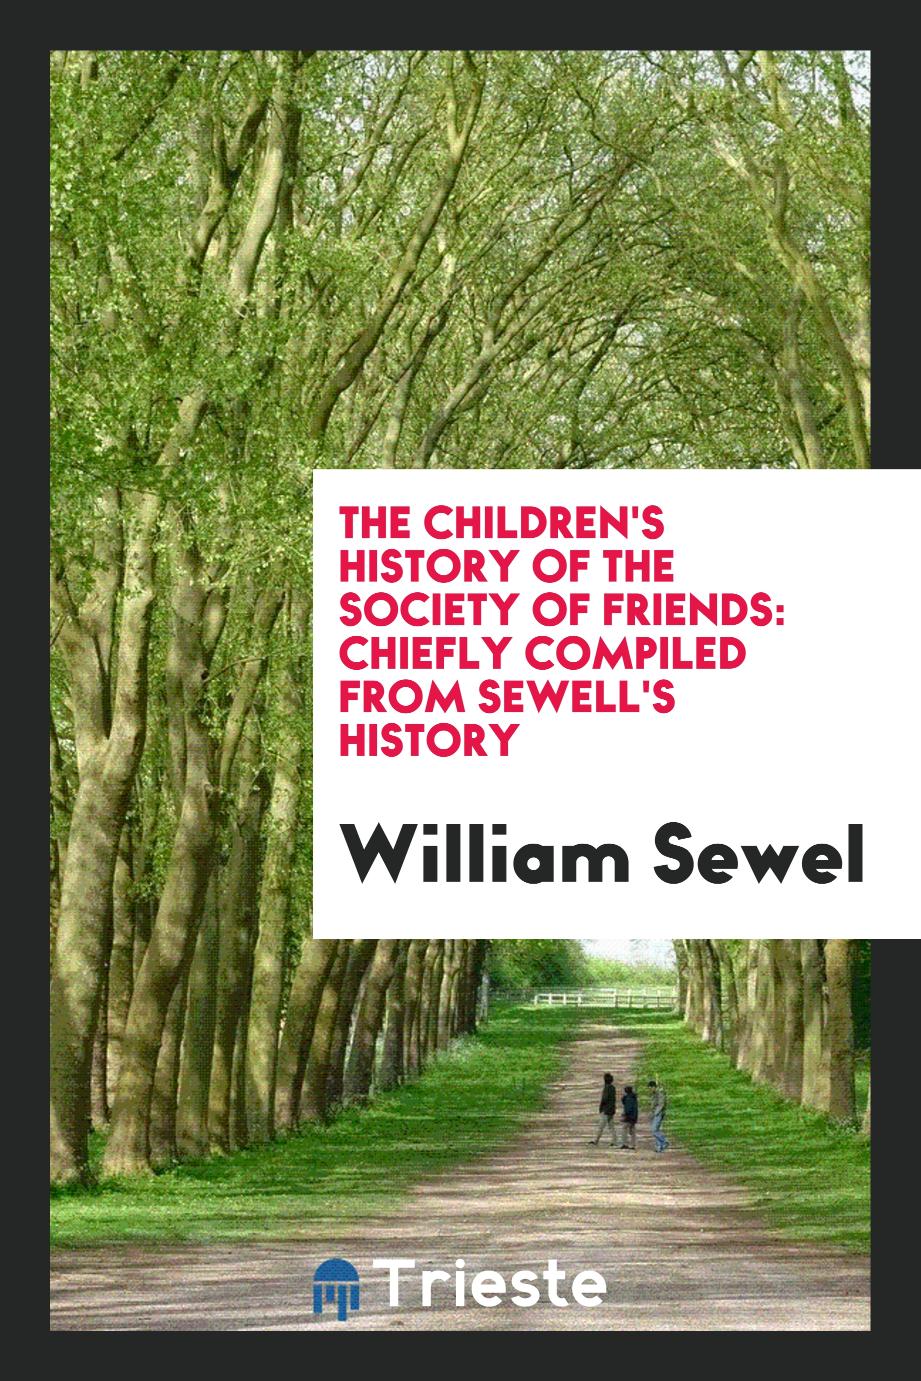 The Children's History of the Society of Friends: Chiefly Compiled from Sewell's History